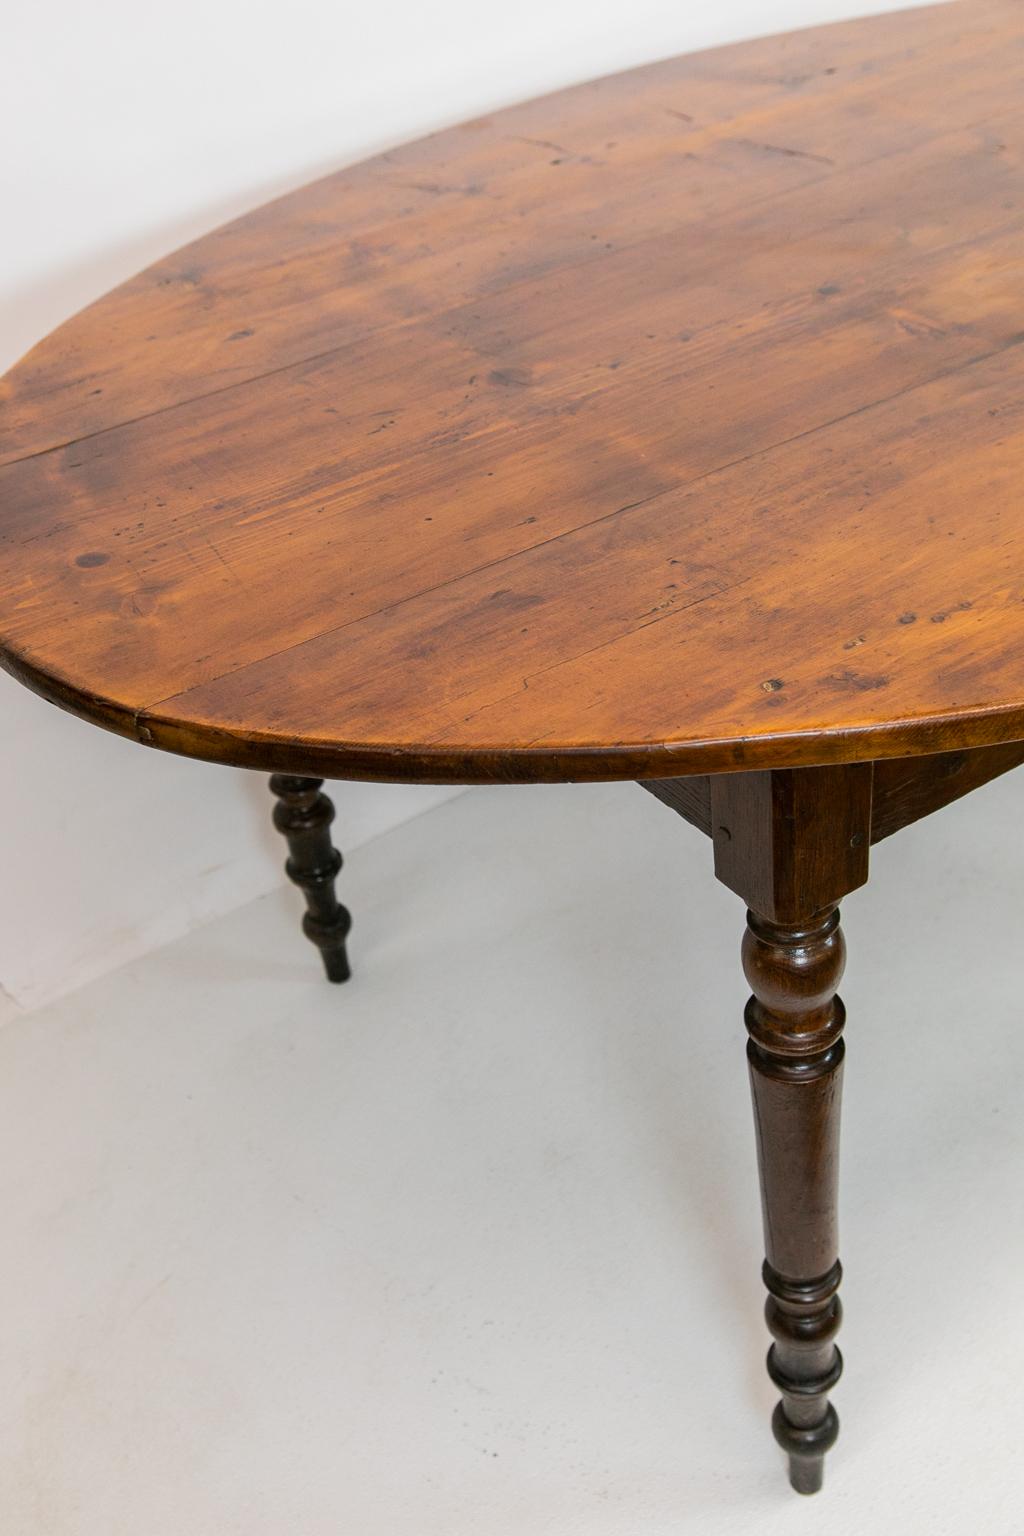 Turned English Oval Pine Kitchen Table